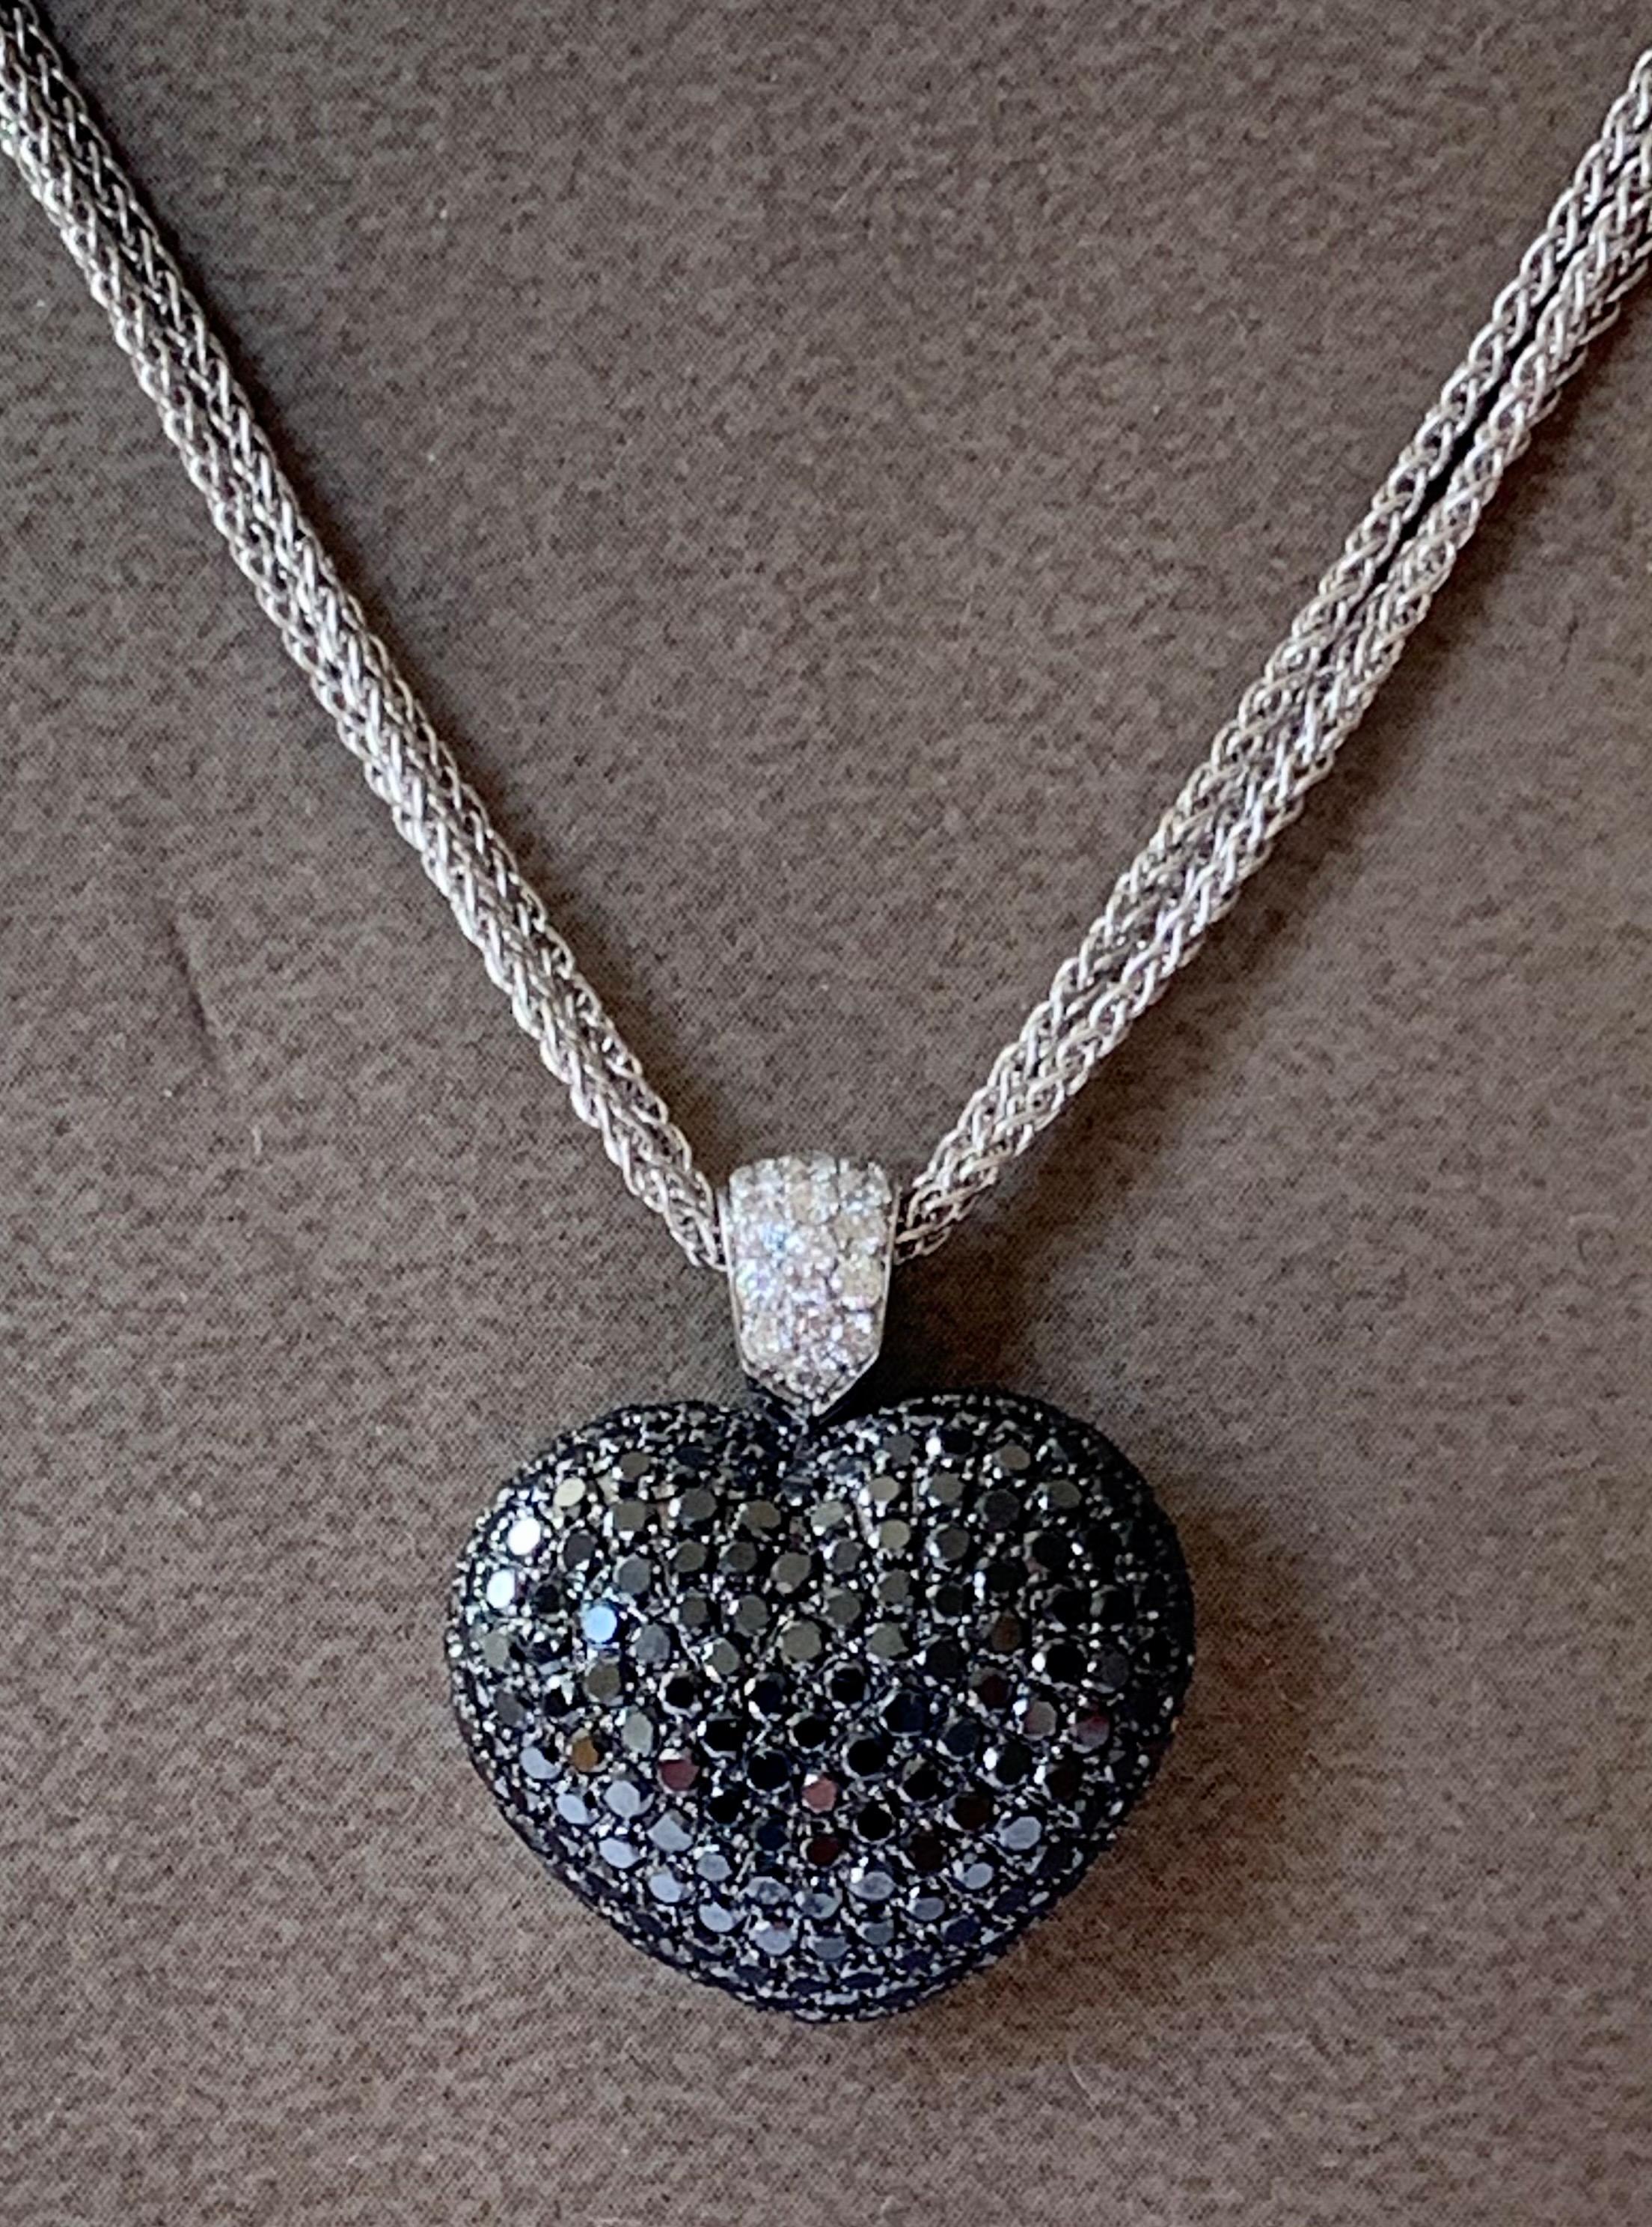 A 18 K white Gold necklace consisting of 3 individual chains with a heart pendant set with brilliant cut black Diamonds with a total weight of approximately 4 ct. The pendant is suspended on a diamond encrusted bale made with 18 K white gold. 16